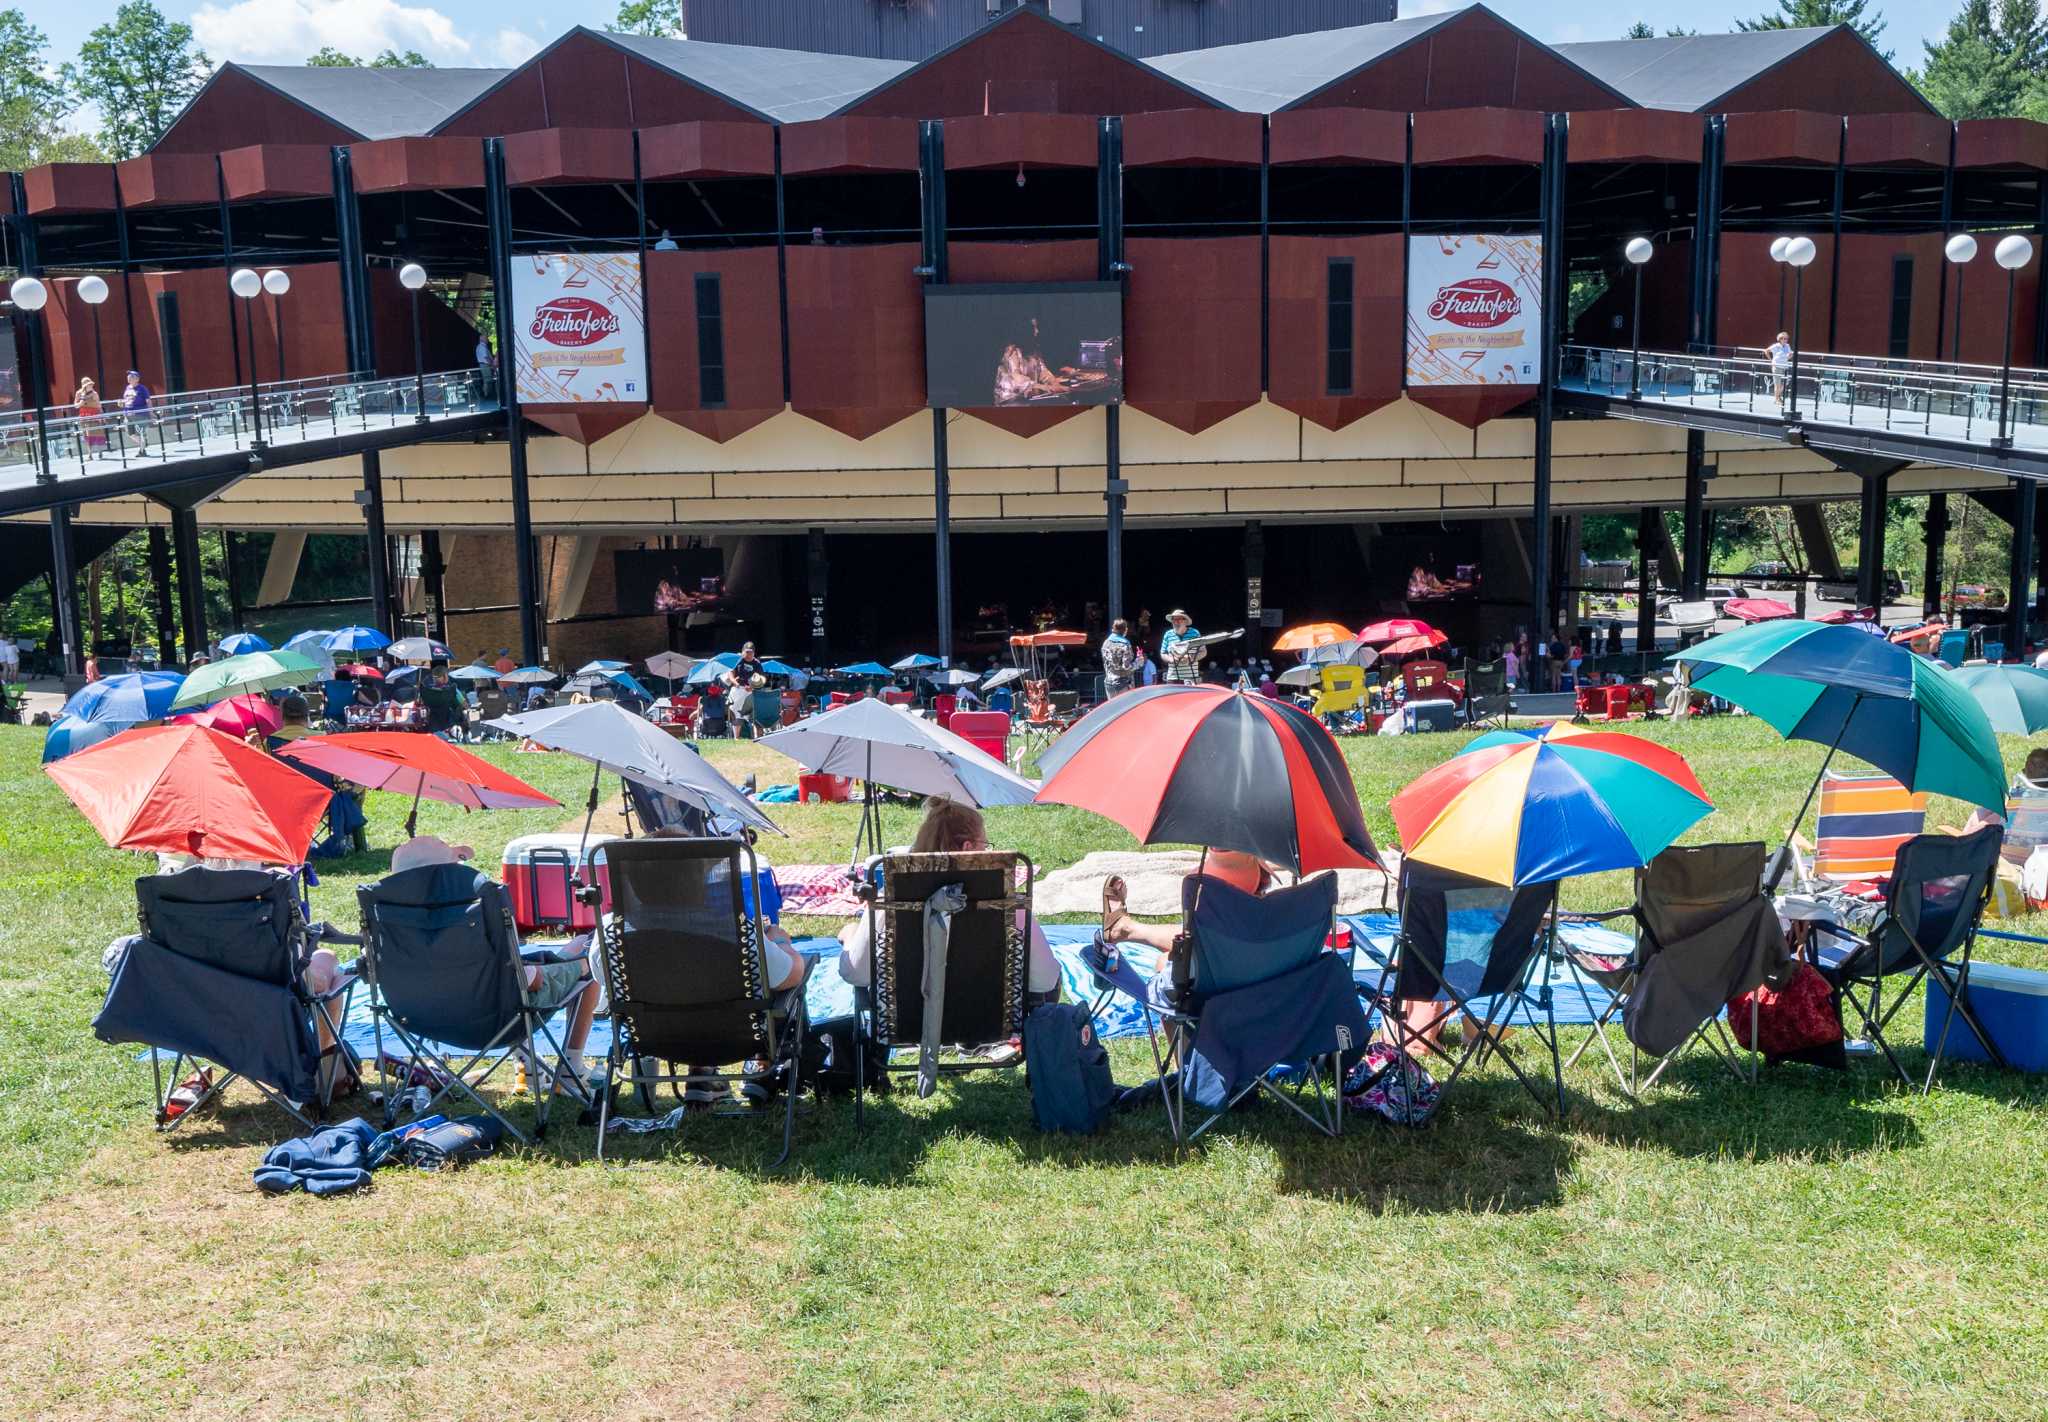 Freihofer's to end partnership with the Saratoga Jazz Festival at SPAC